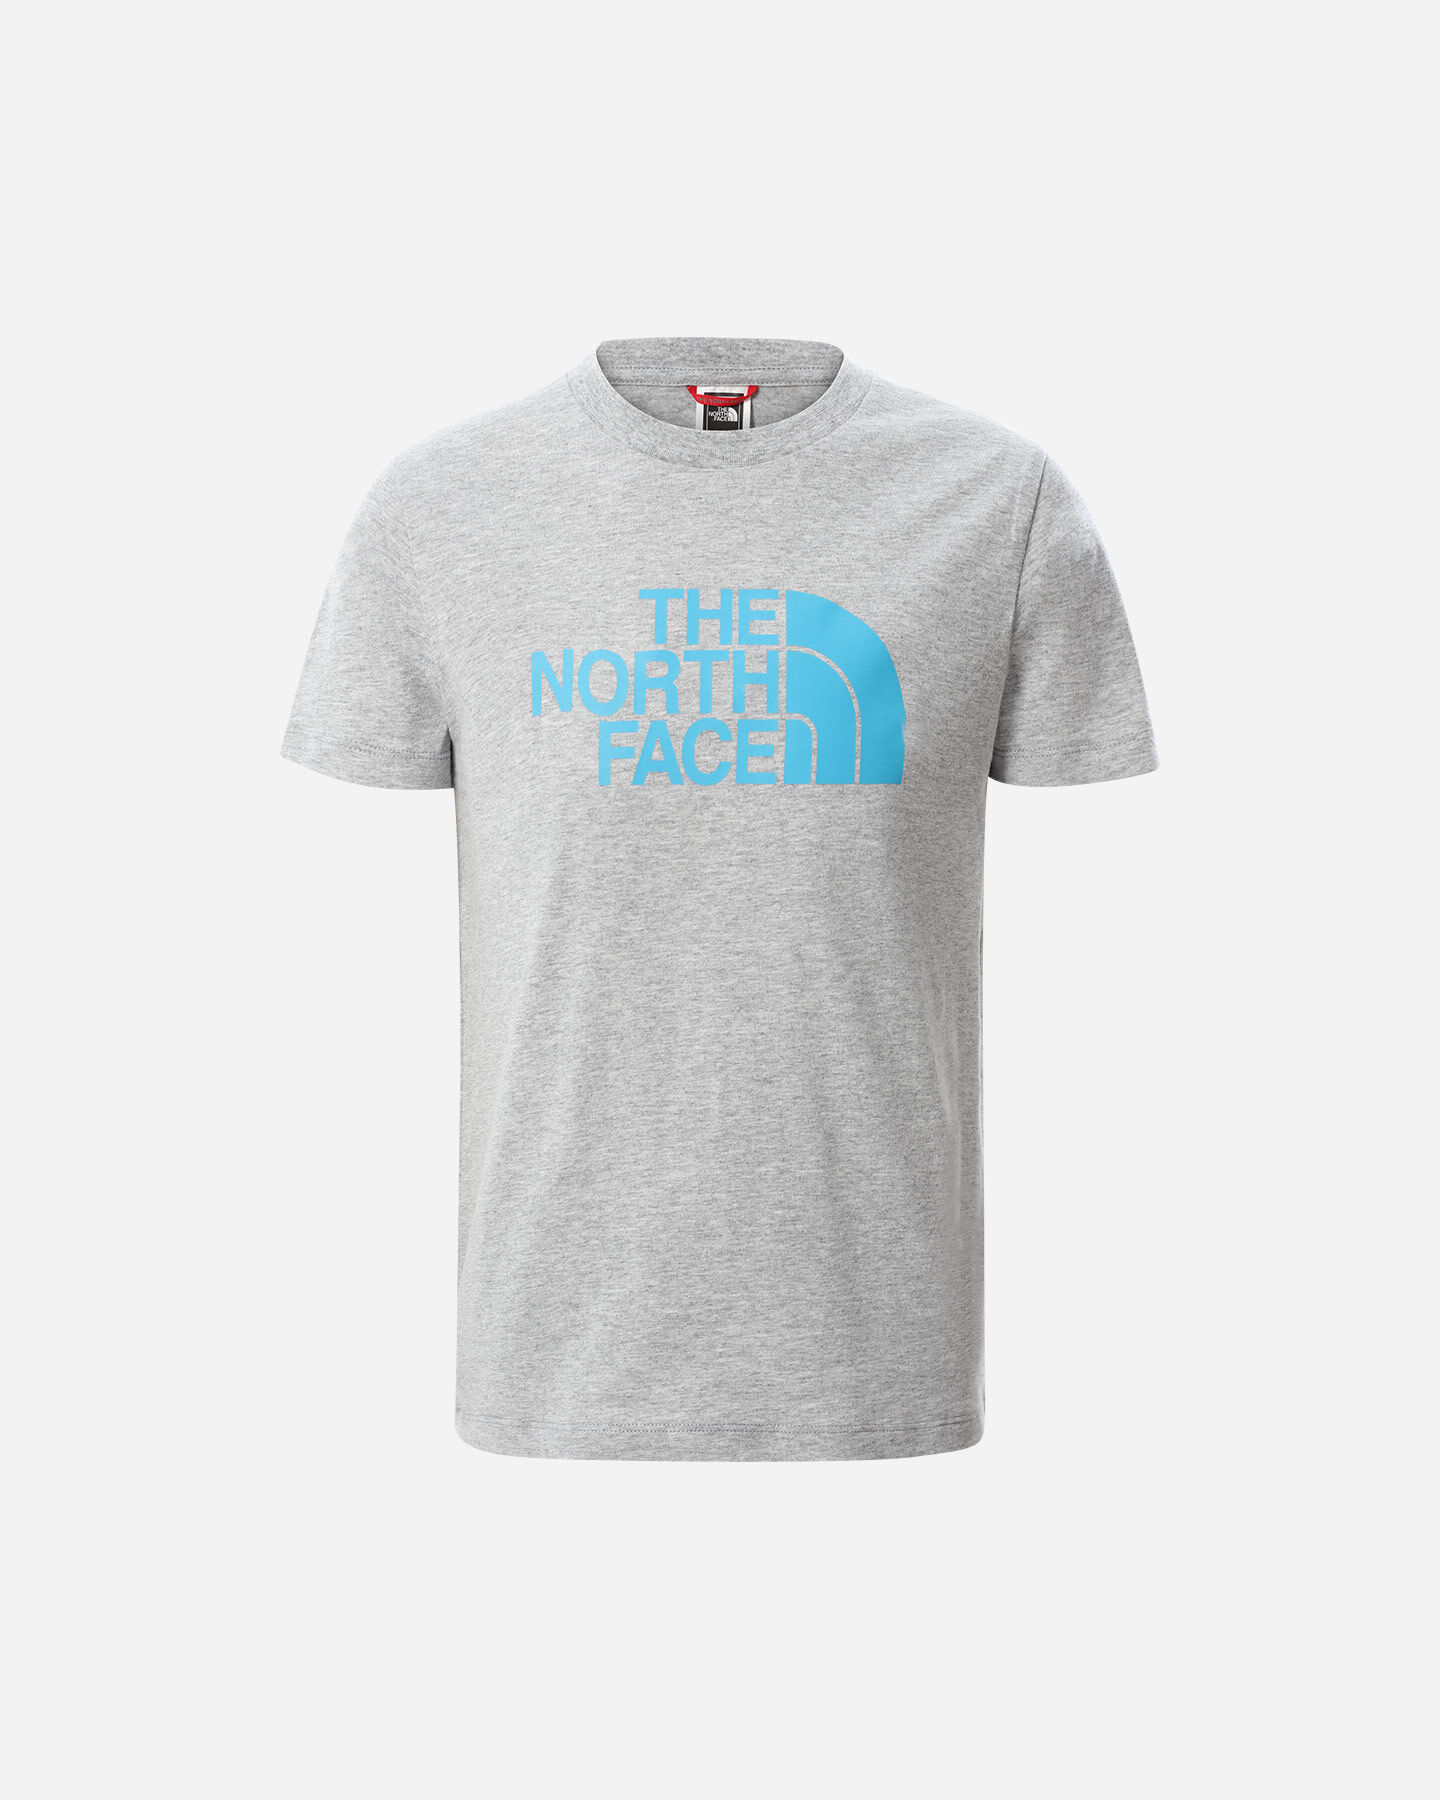  T-Shirt THE NORTH FACE EASY  JR S5241415 scatto 0